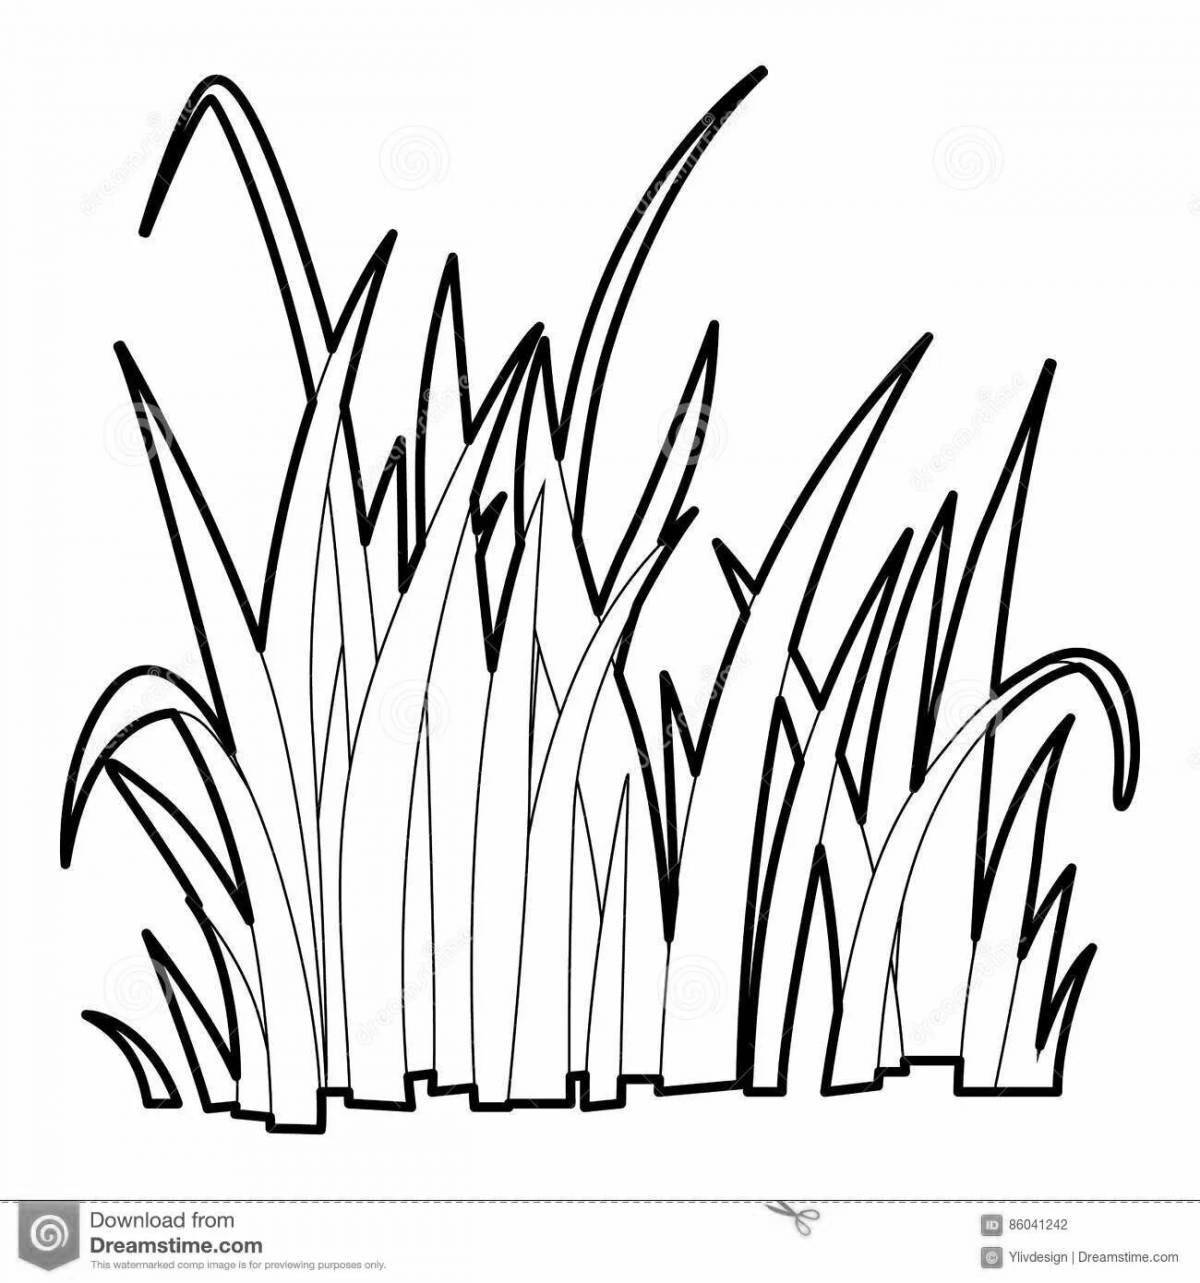 Exciting hay coloring for kids